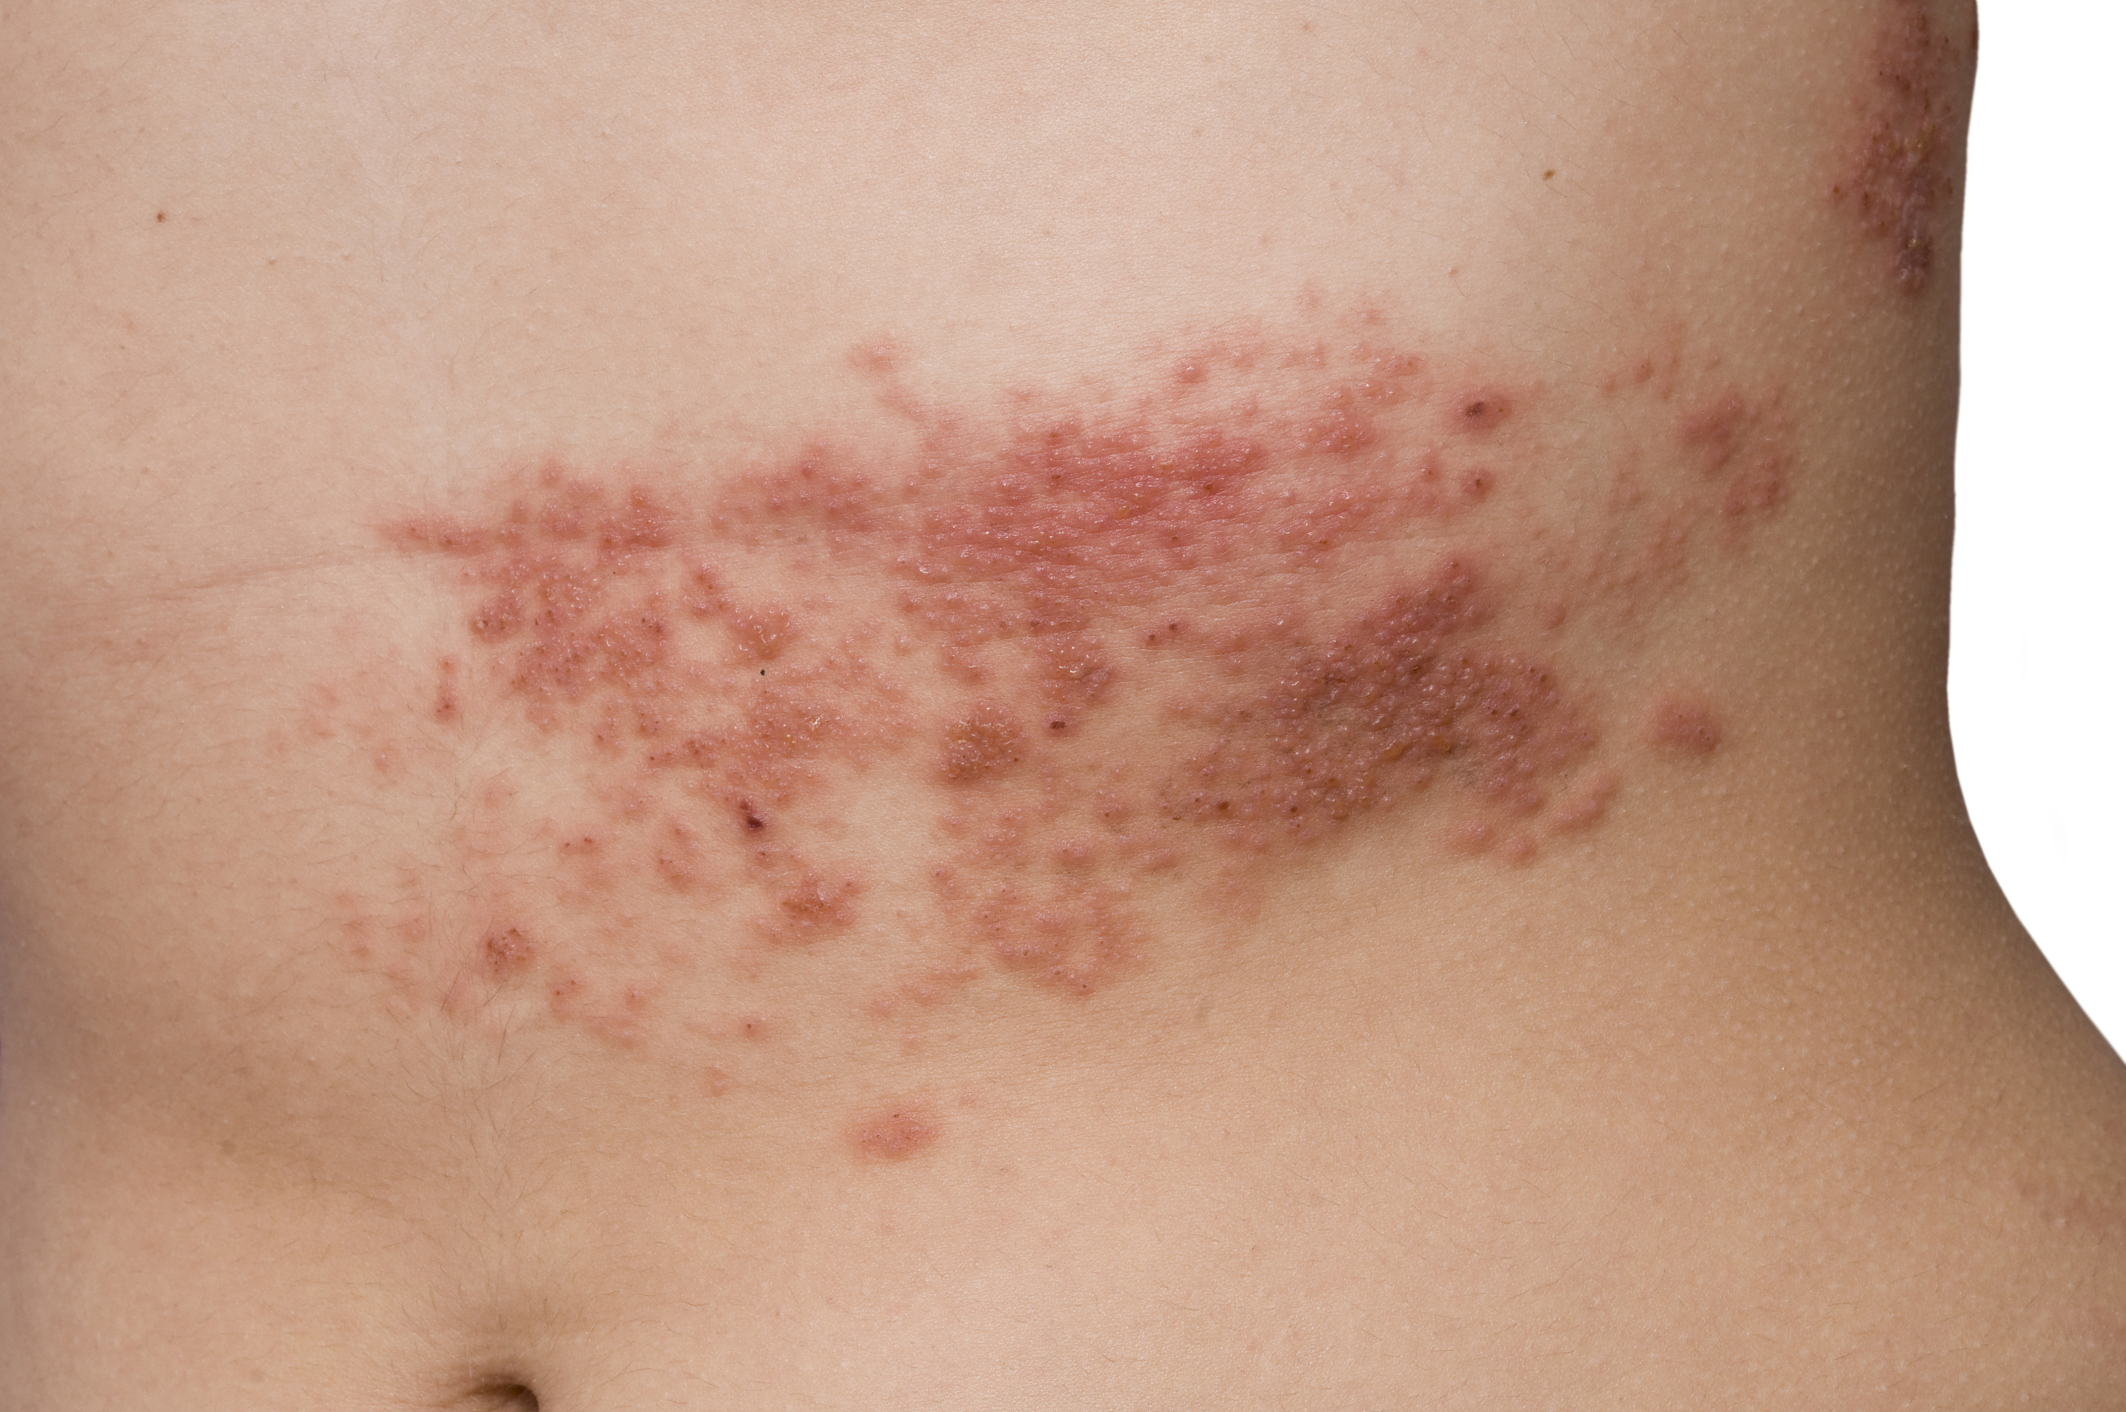 Study: Shingles in young adults can increase risk for heart attack